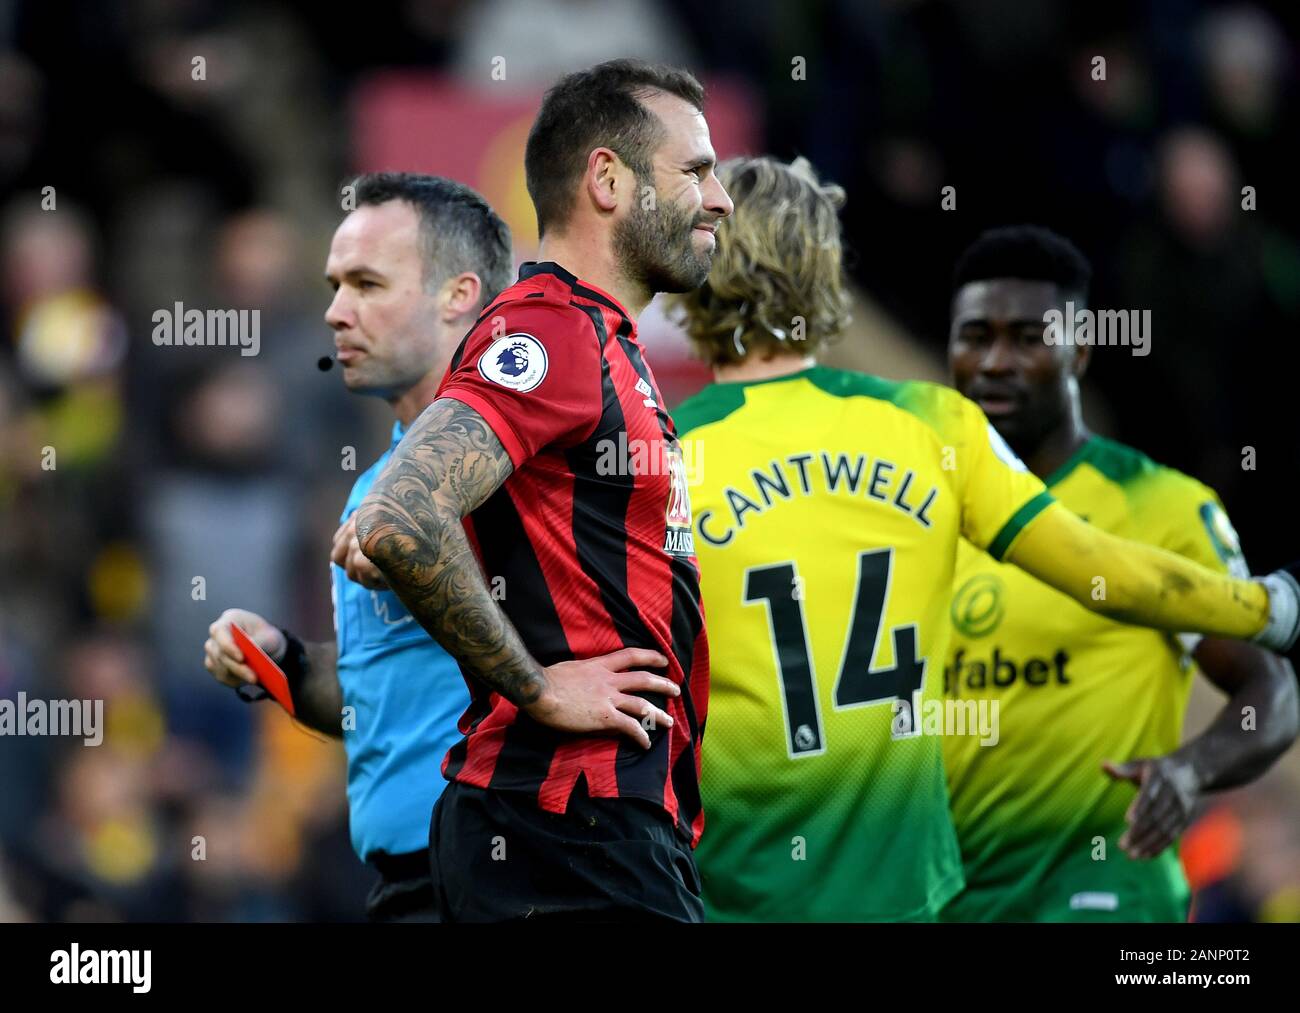 Bournemouth S Steve Cook During The Premier League Match At The Vitality Stadium Bournemouth Stock Photo Alamy